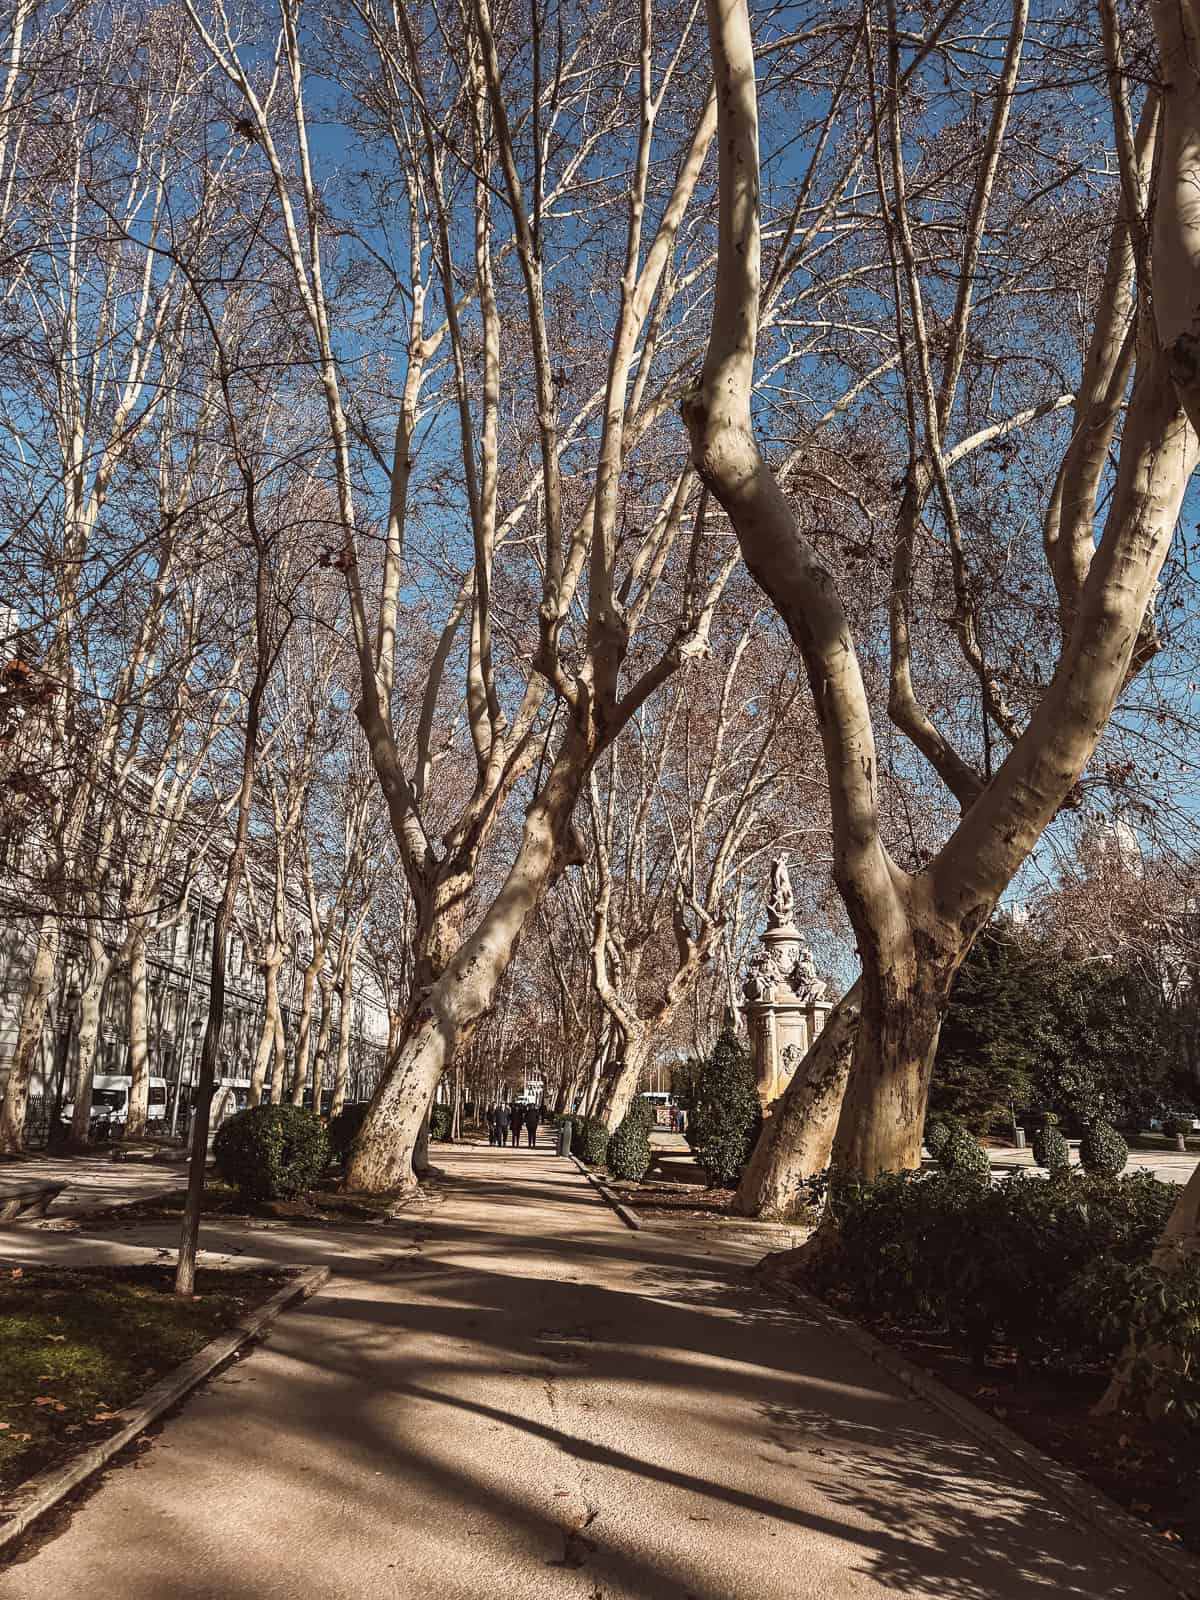 A peaceful pathway lined with tall, leafless trees casting long shadows on the ground, with pedestrians strolling in the distance on a bright, clear day.